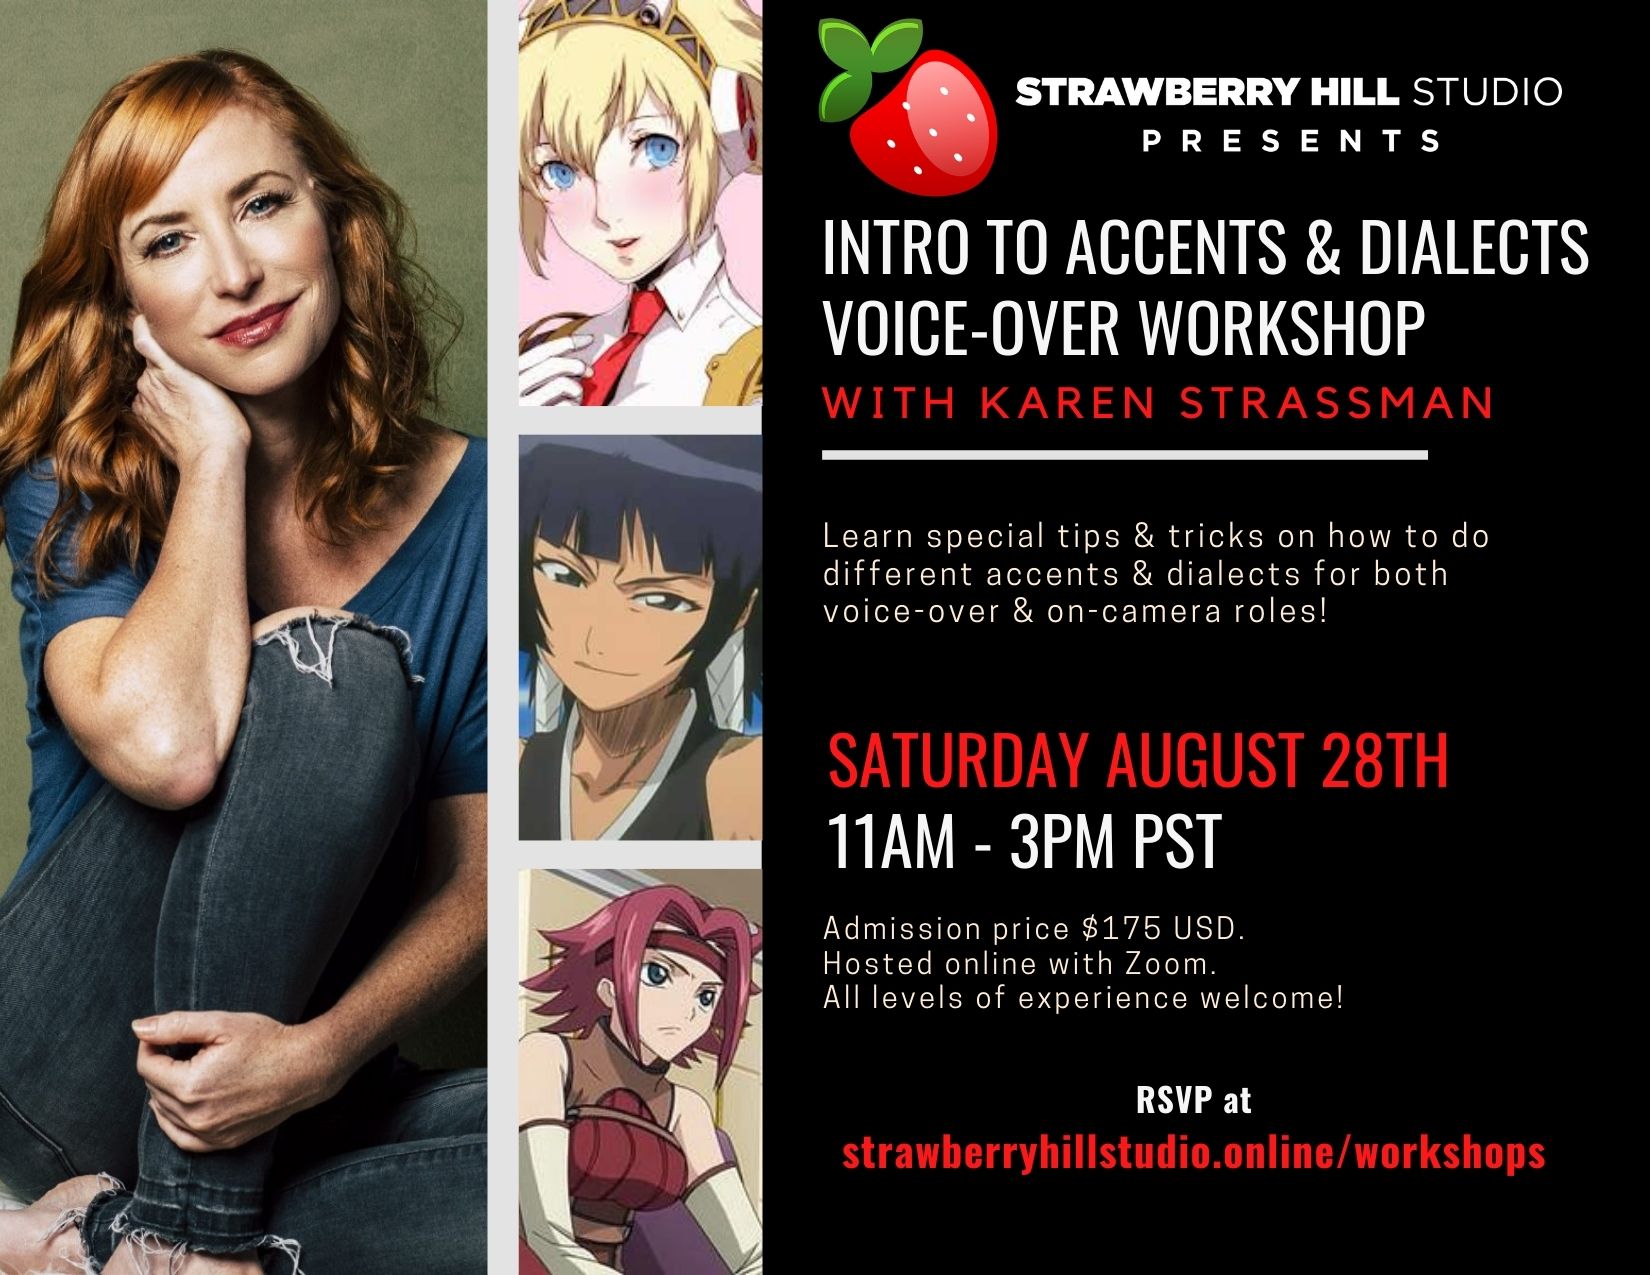 Intro to Accents & Dialects Voice-Over Workshop w/ Karen Strassman